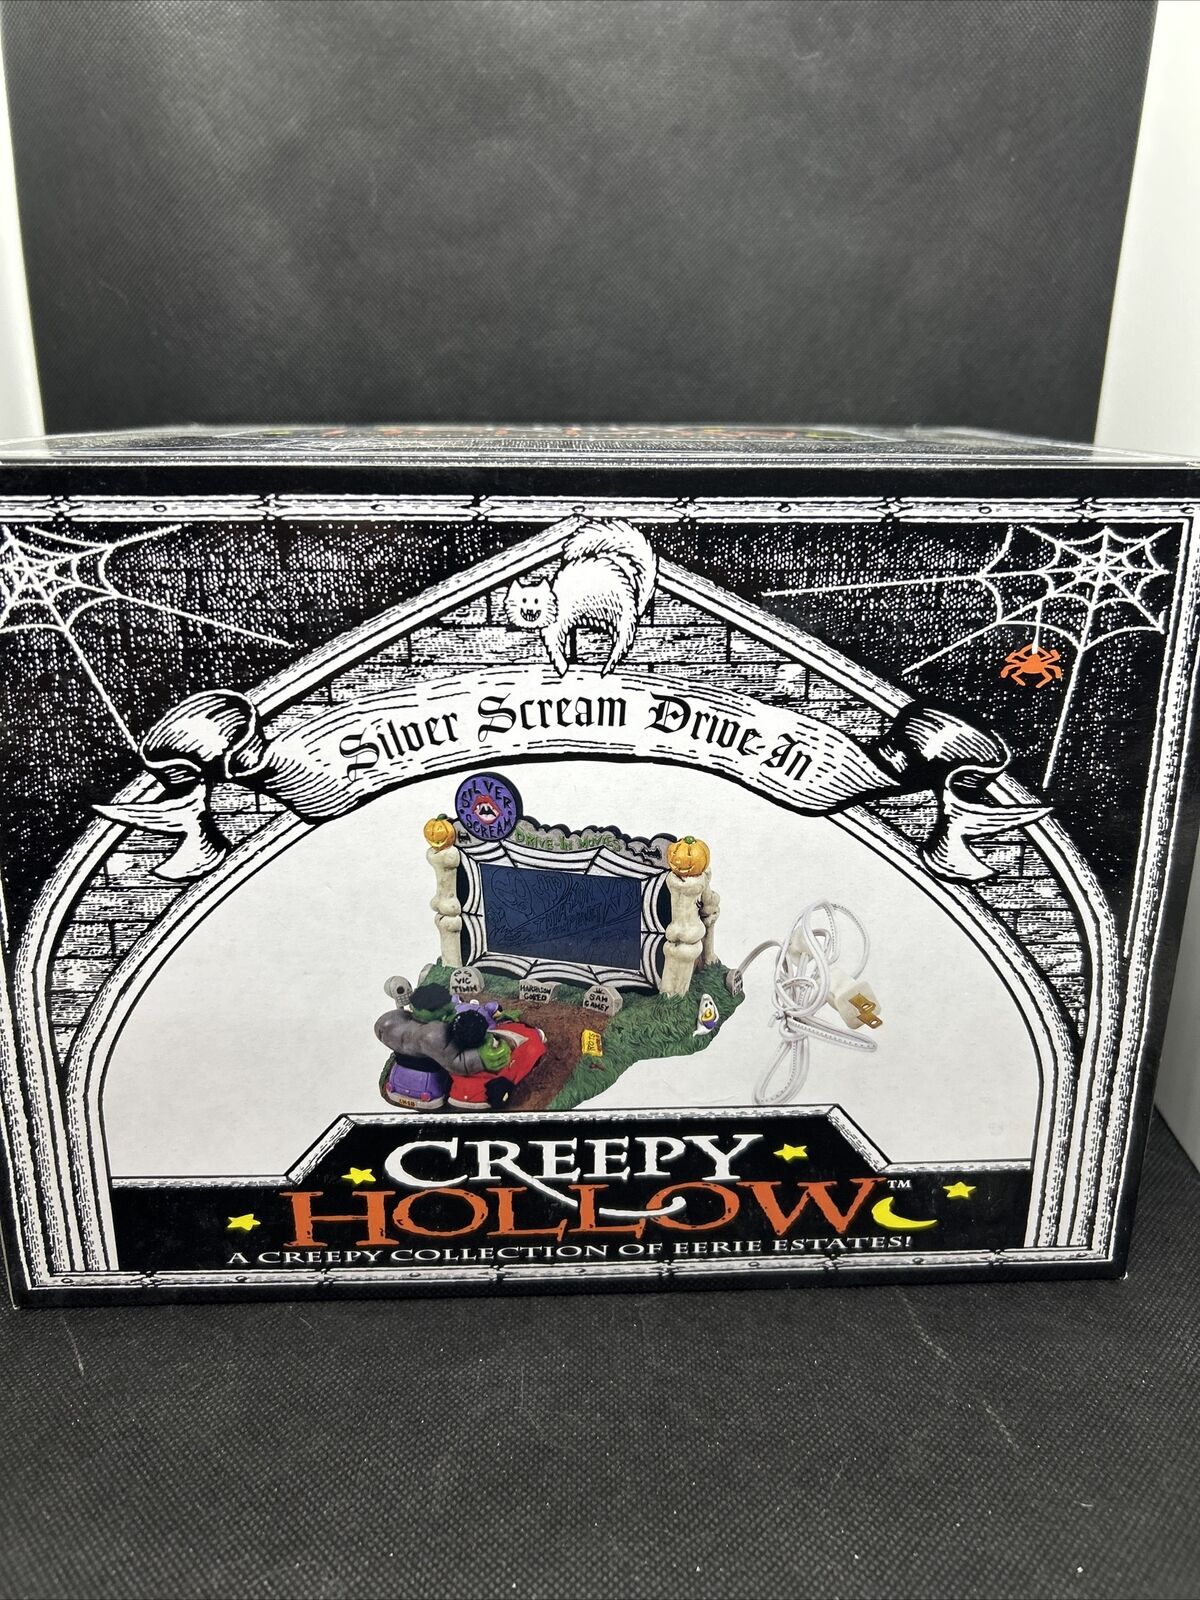 Midwest Of Cannon Falls Creepy Hollow Silver Scream Drive-In New In Box